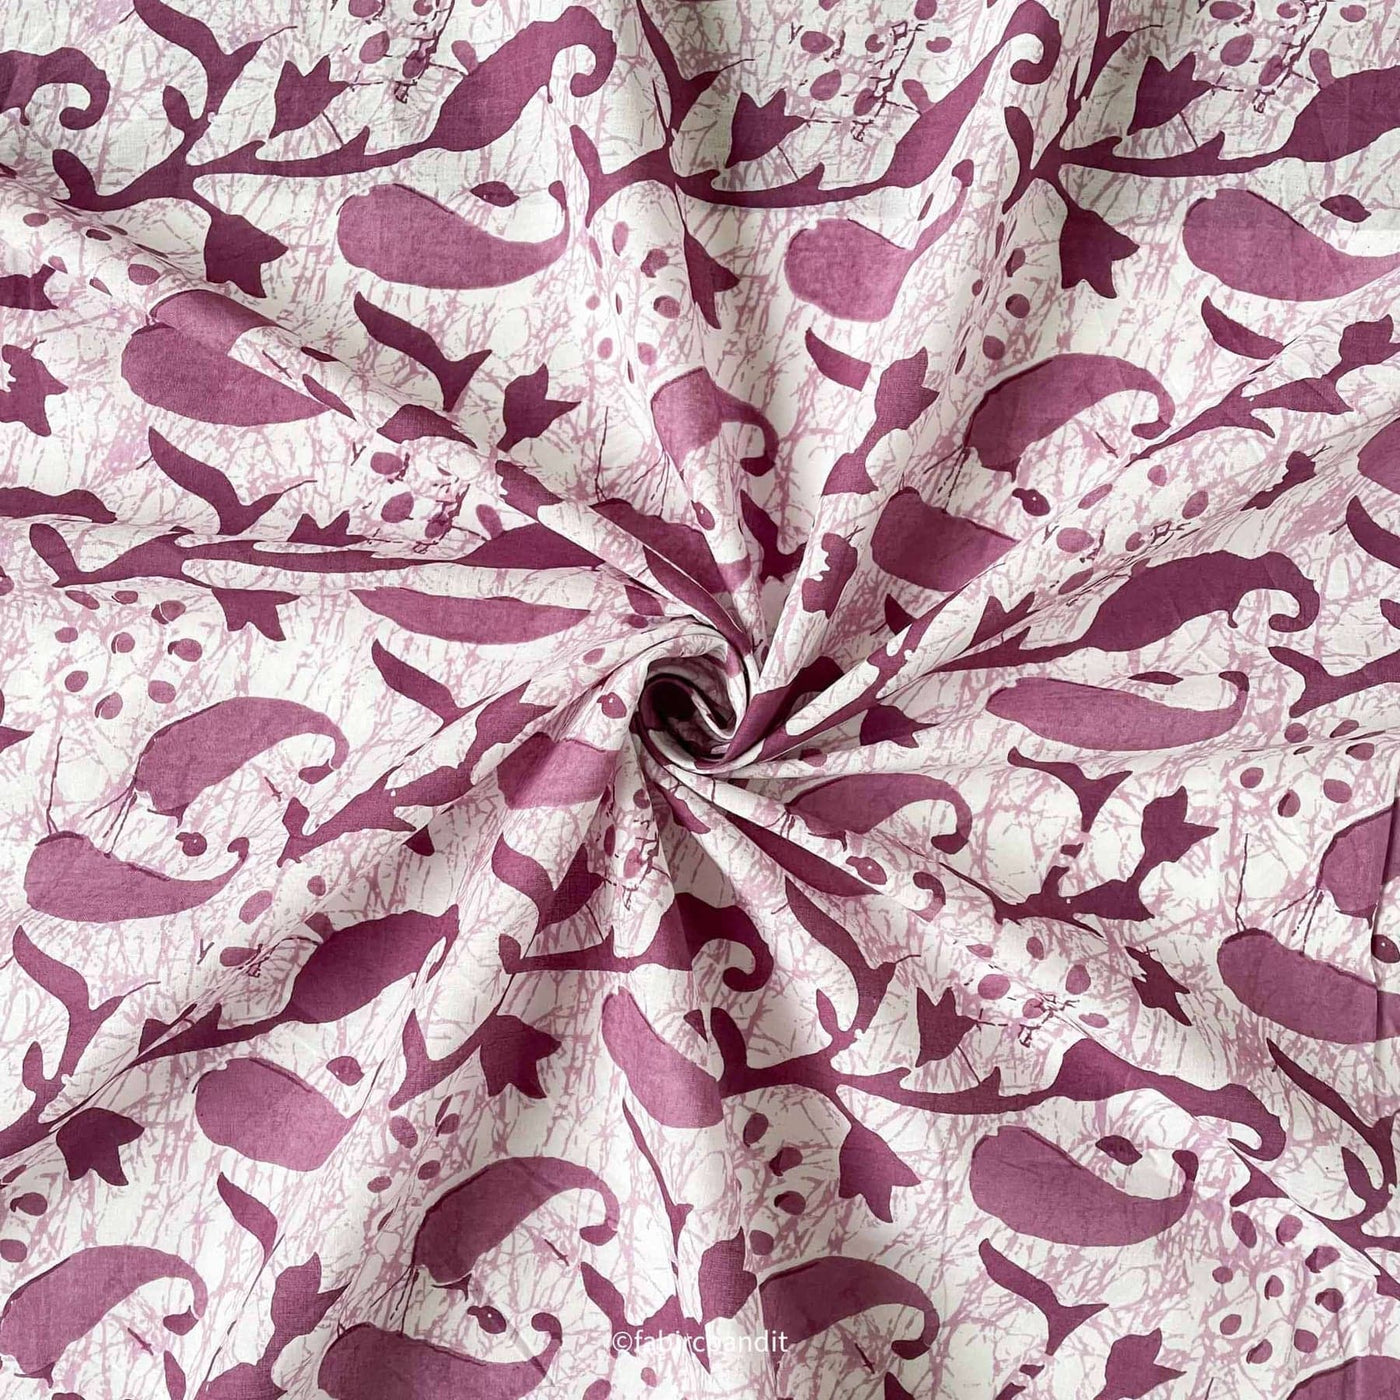 Fabric Pandit Fabric White & Purple Batik Natural Dyed Floral Paisely Hand Block Printed Cotton Fabric (Width 43 inches)